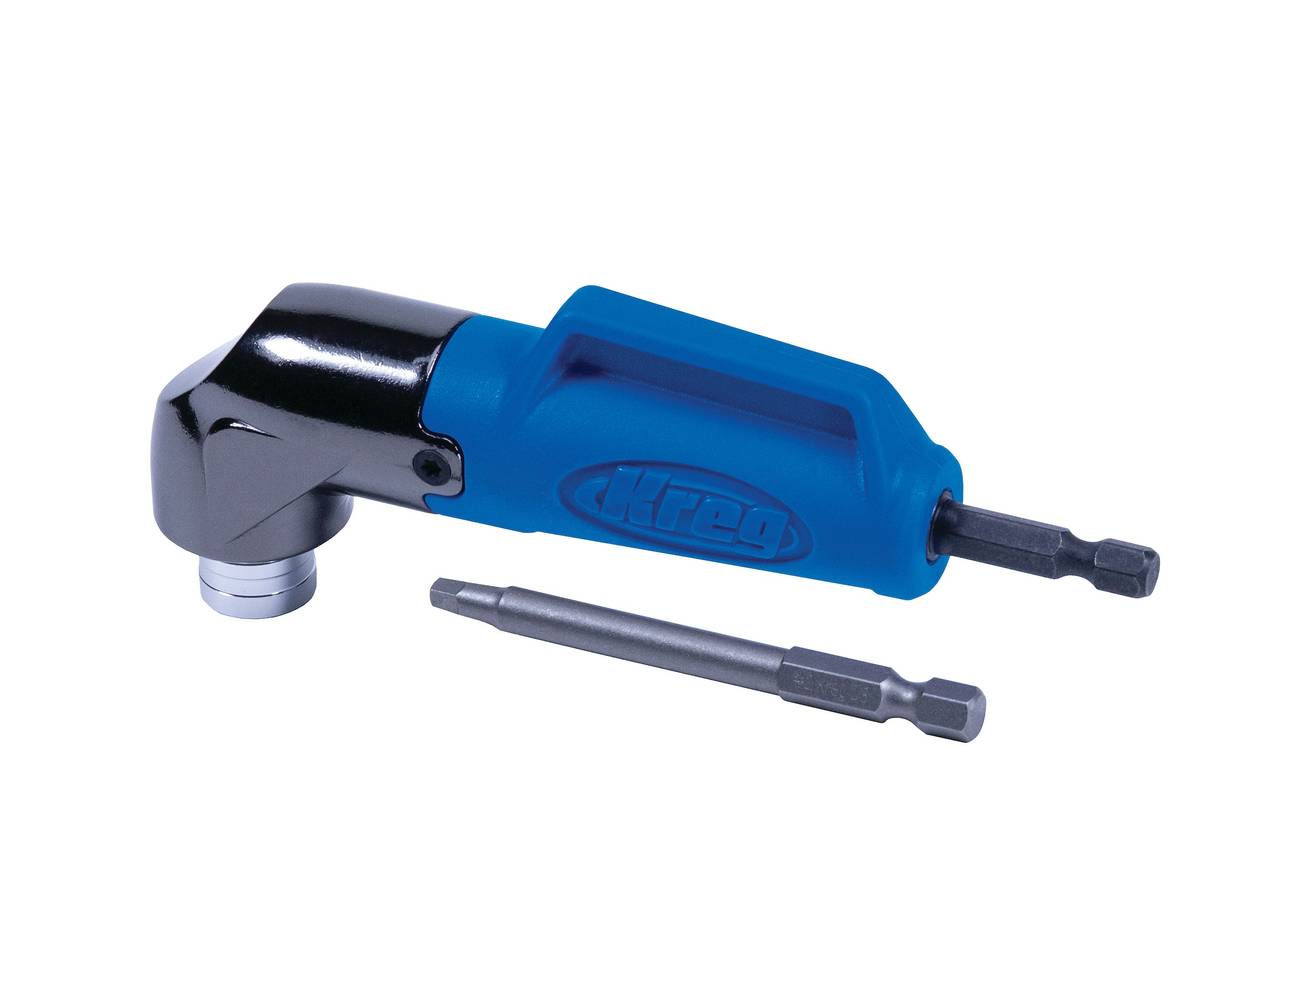 Kreg 90 Degree Pocket-Hole Driver with Magnetic-Tip Bit for Tight Spaces - Drive Tool & Socket Accessory | KDRV-90DG